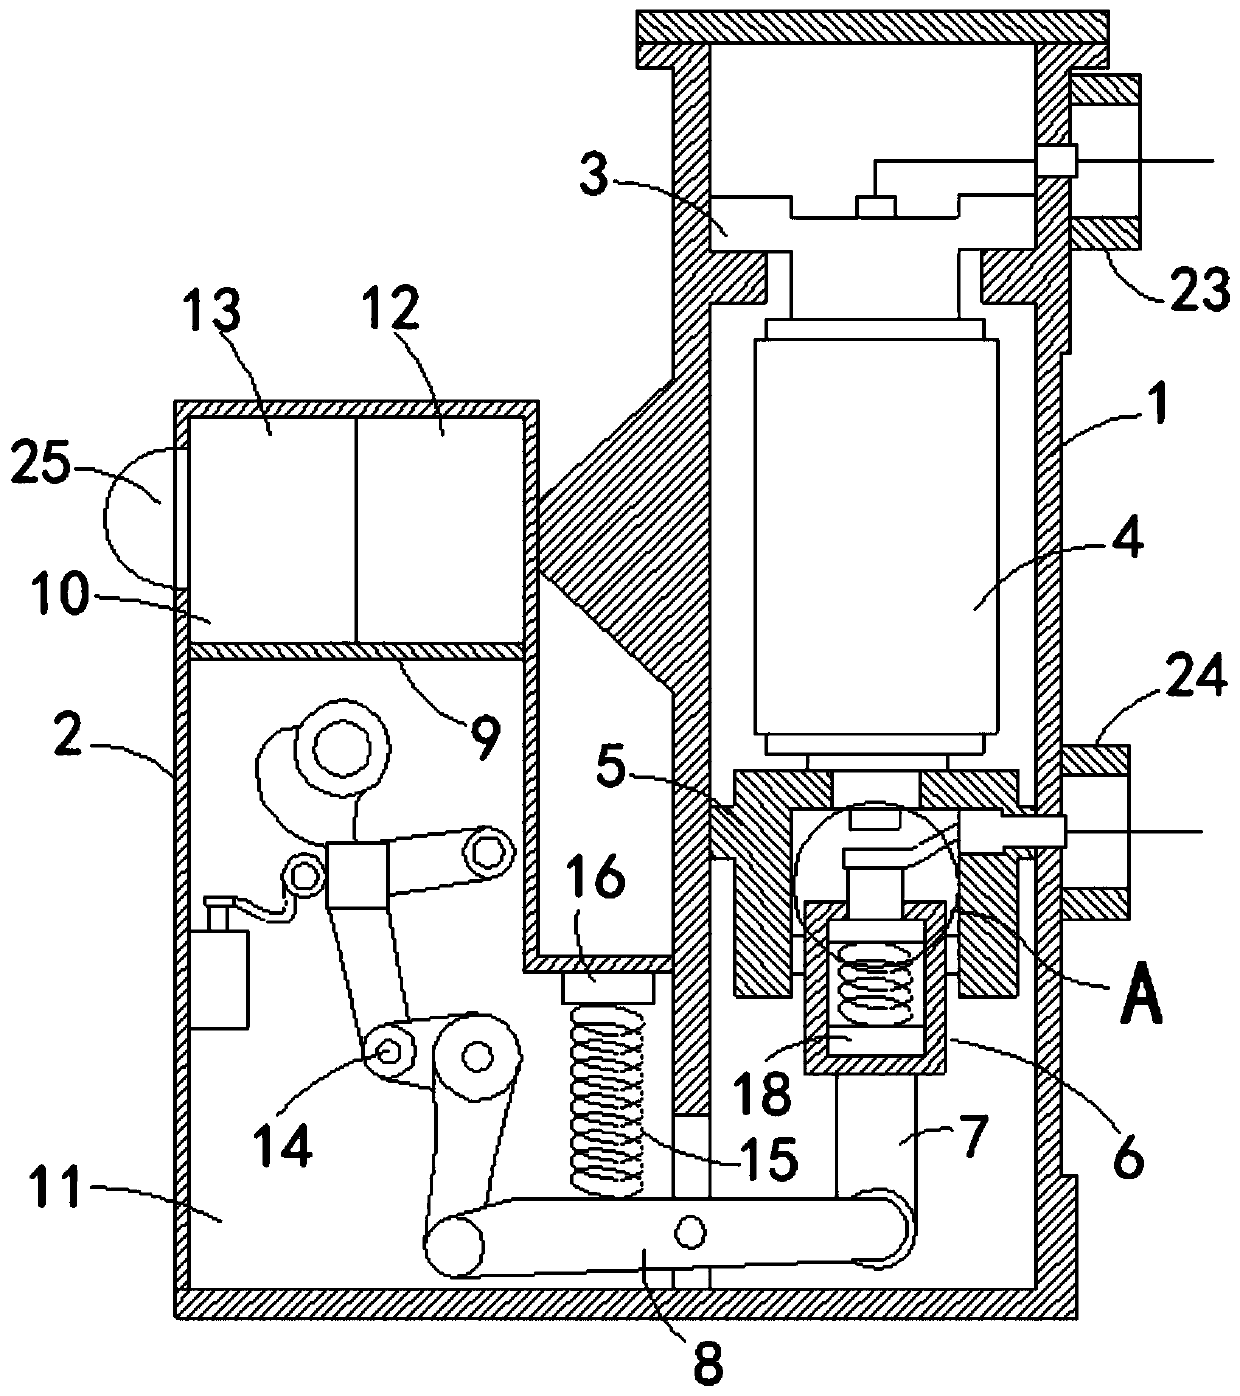 A Method of On-line Monitoring Mechanism Spring of High Voltage Circuit Breaker Using Load Cell